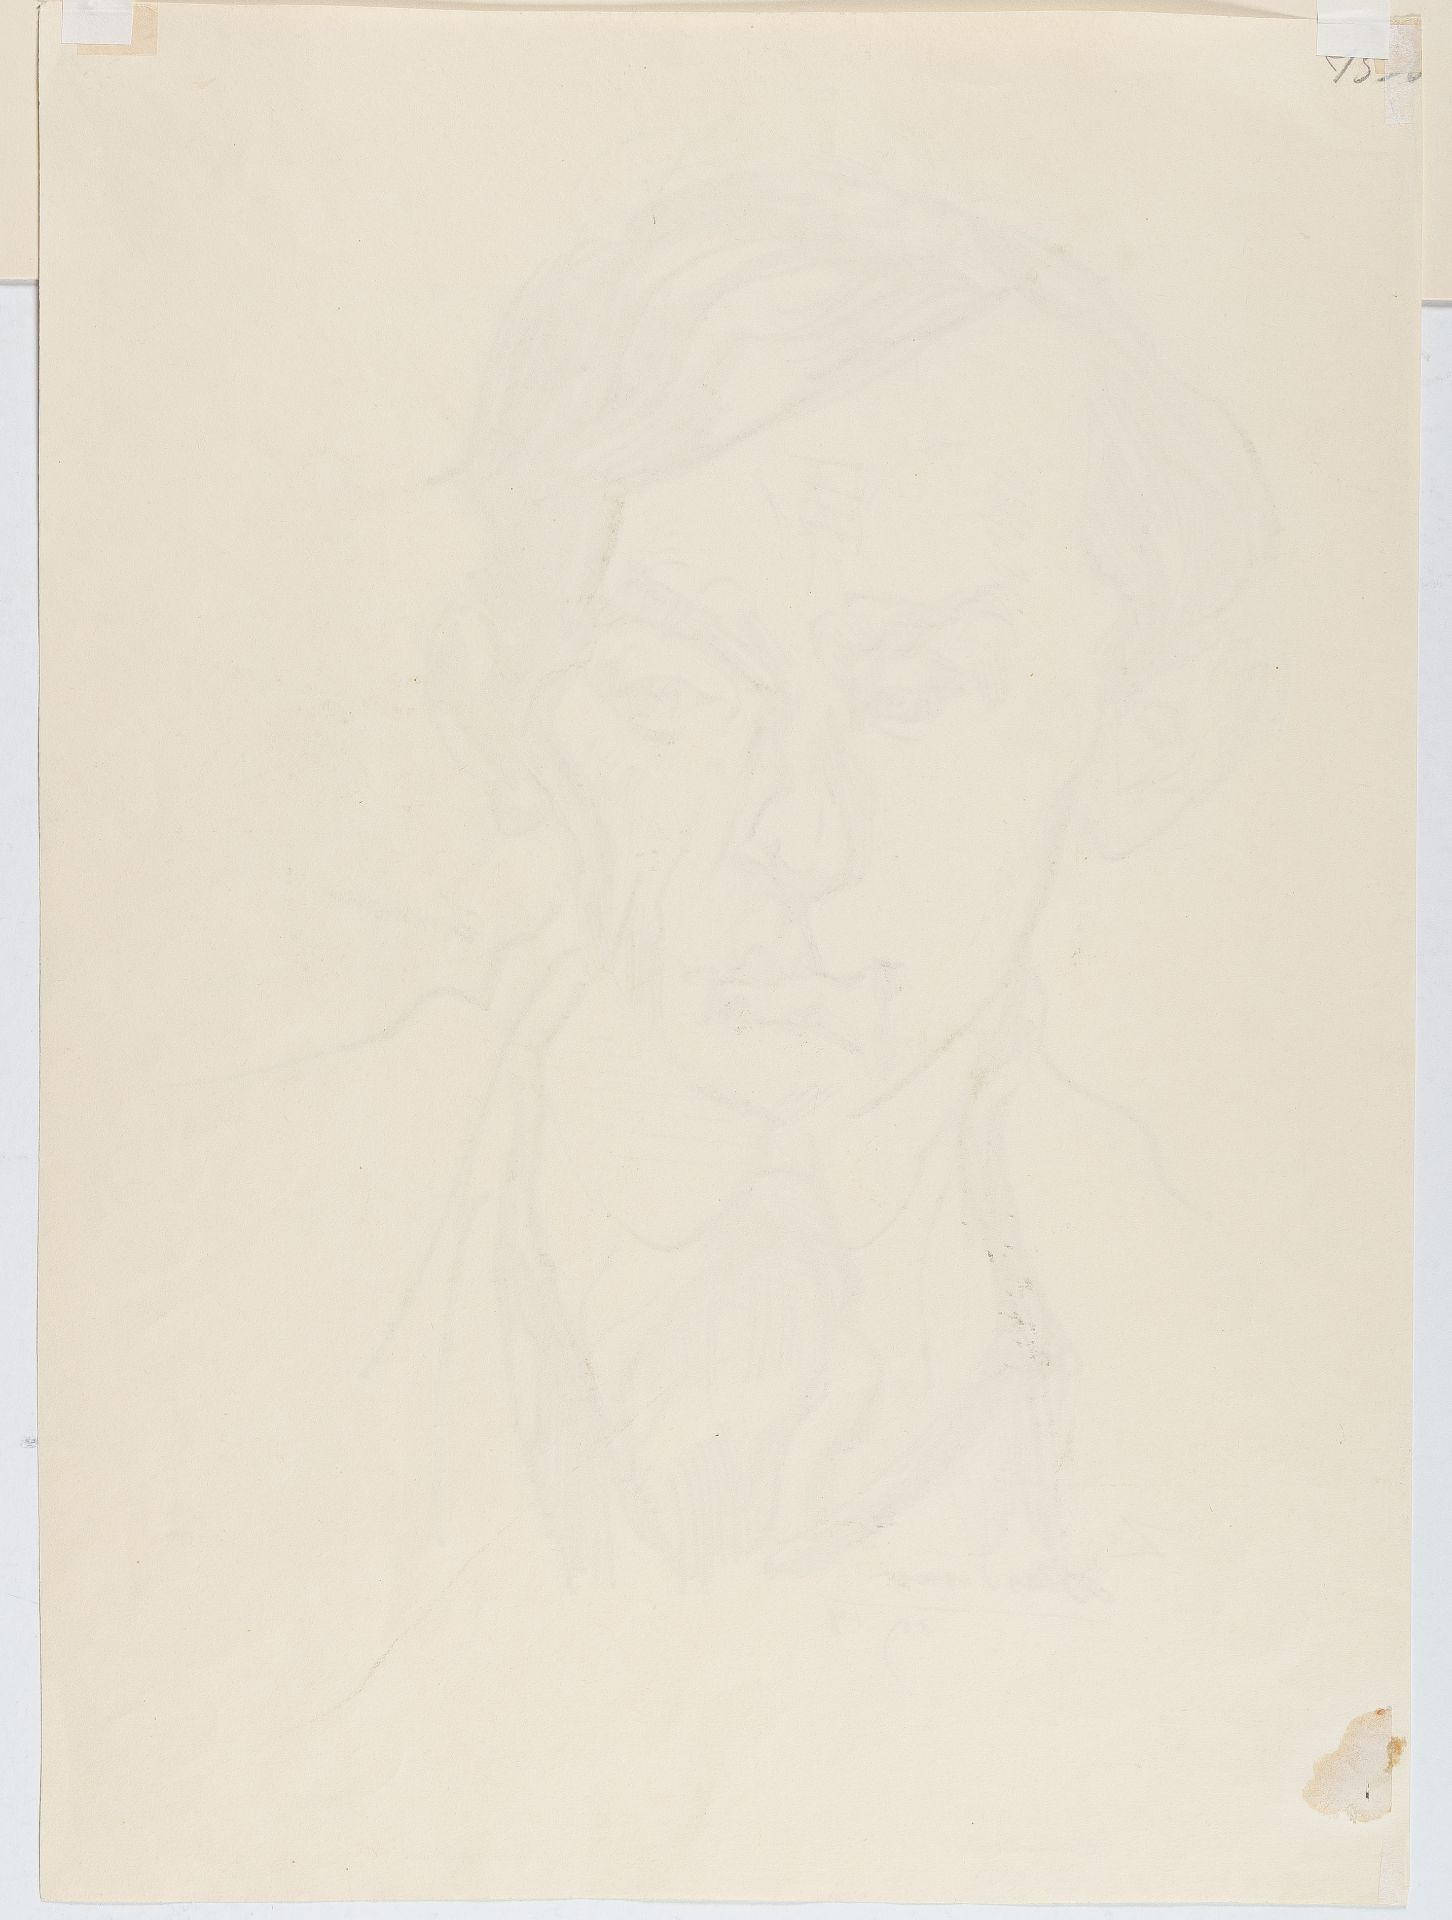 Ludwig Meidner, Portrait Hermann.Reed pen with Indian ink and chalk on firm, cream wove. 1914. Ca. - Image 3 of 3